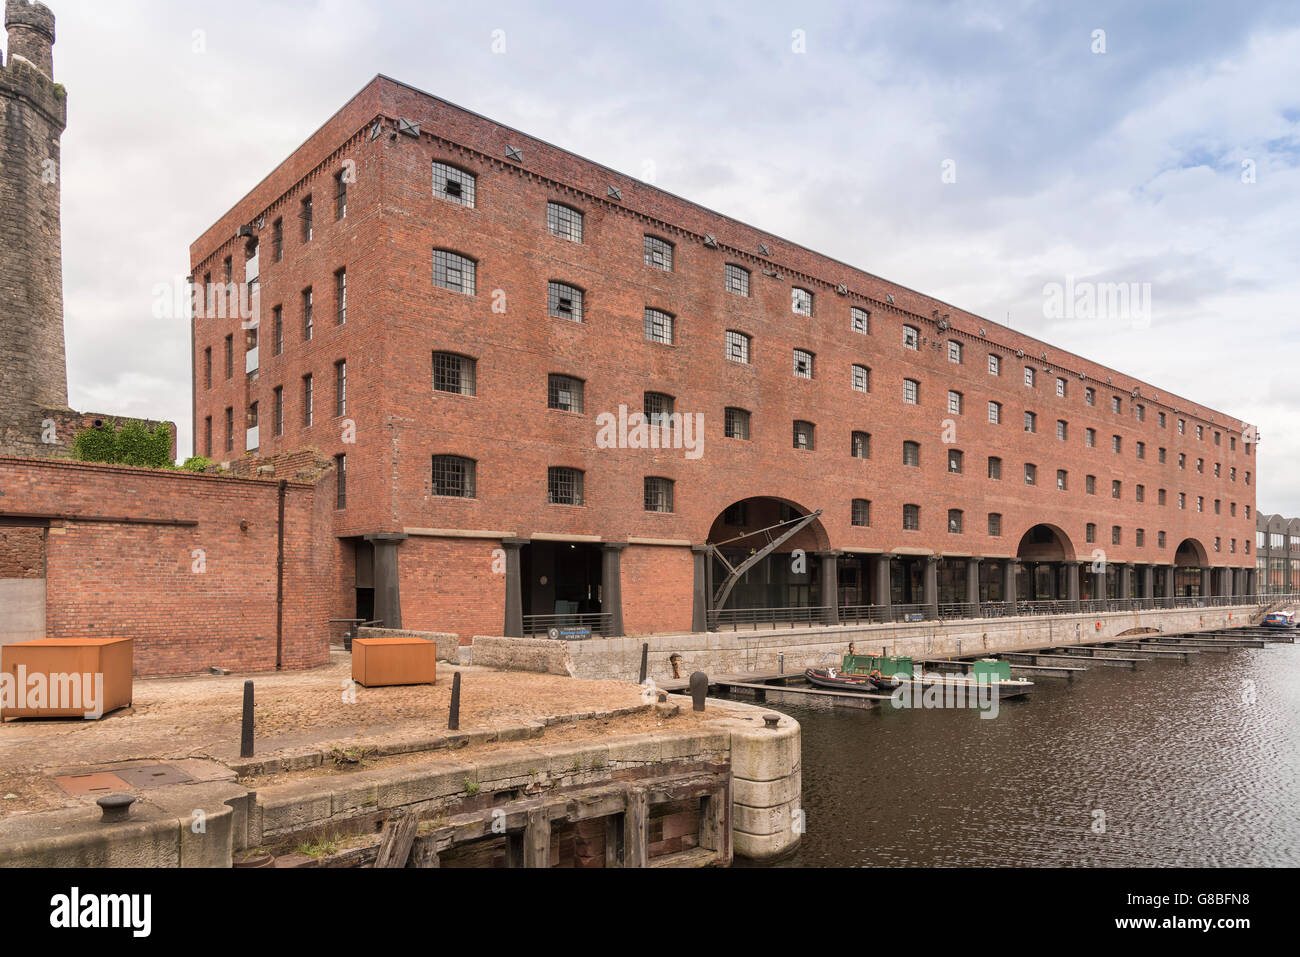 The Titanic Hotel in a converted former warehouse on Stanley Dock in Liverpool North Docks. Merseyside North West England. Stock Photo